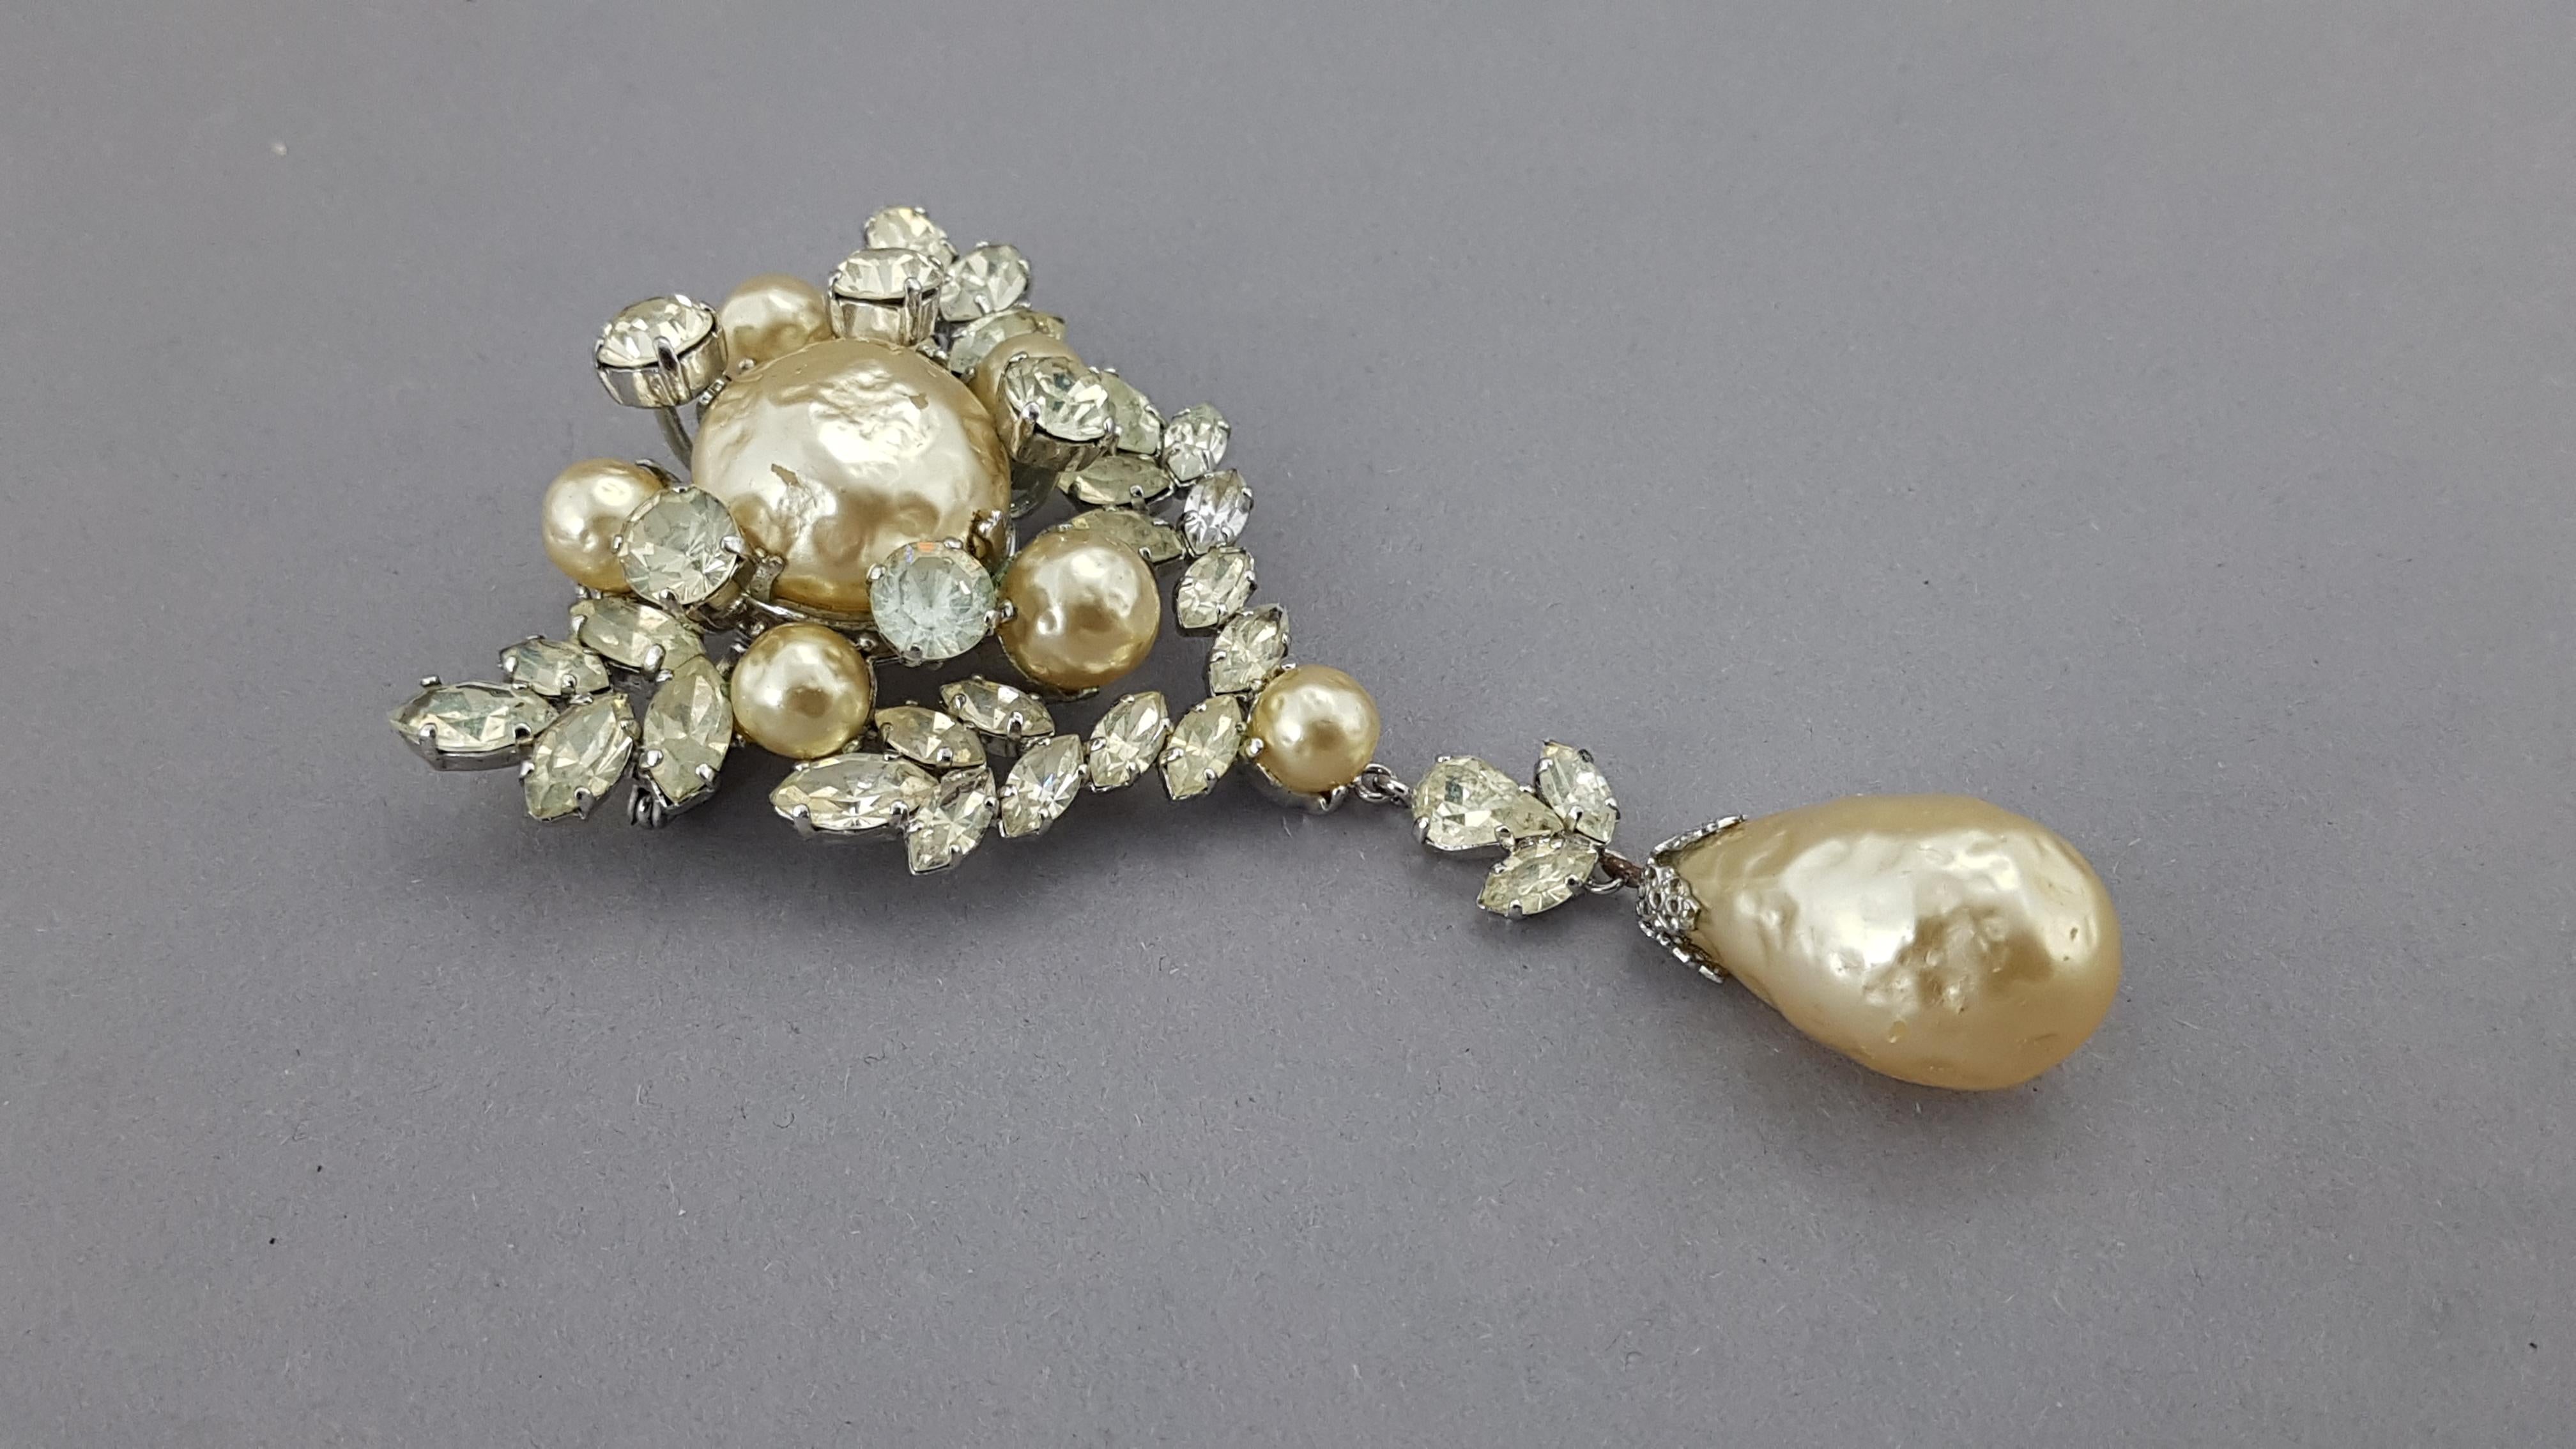 Large vintage Christian Dior brooch, 1961.
 
A beautiful vintage brooch made of 'paste stones' and 'faux pearls'.
A rare piece of jewelry made in 1961 by the company Henkel & Grosse for Christian Dior.
 
Specifications:
 
- Designer: Henkel &